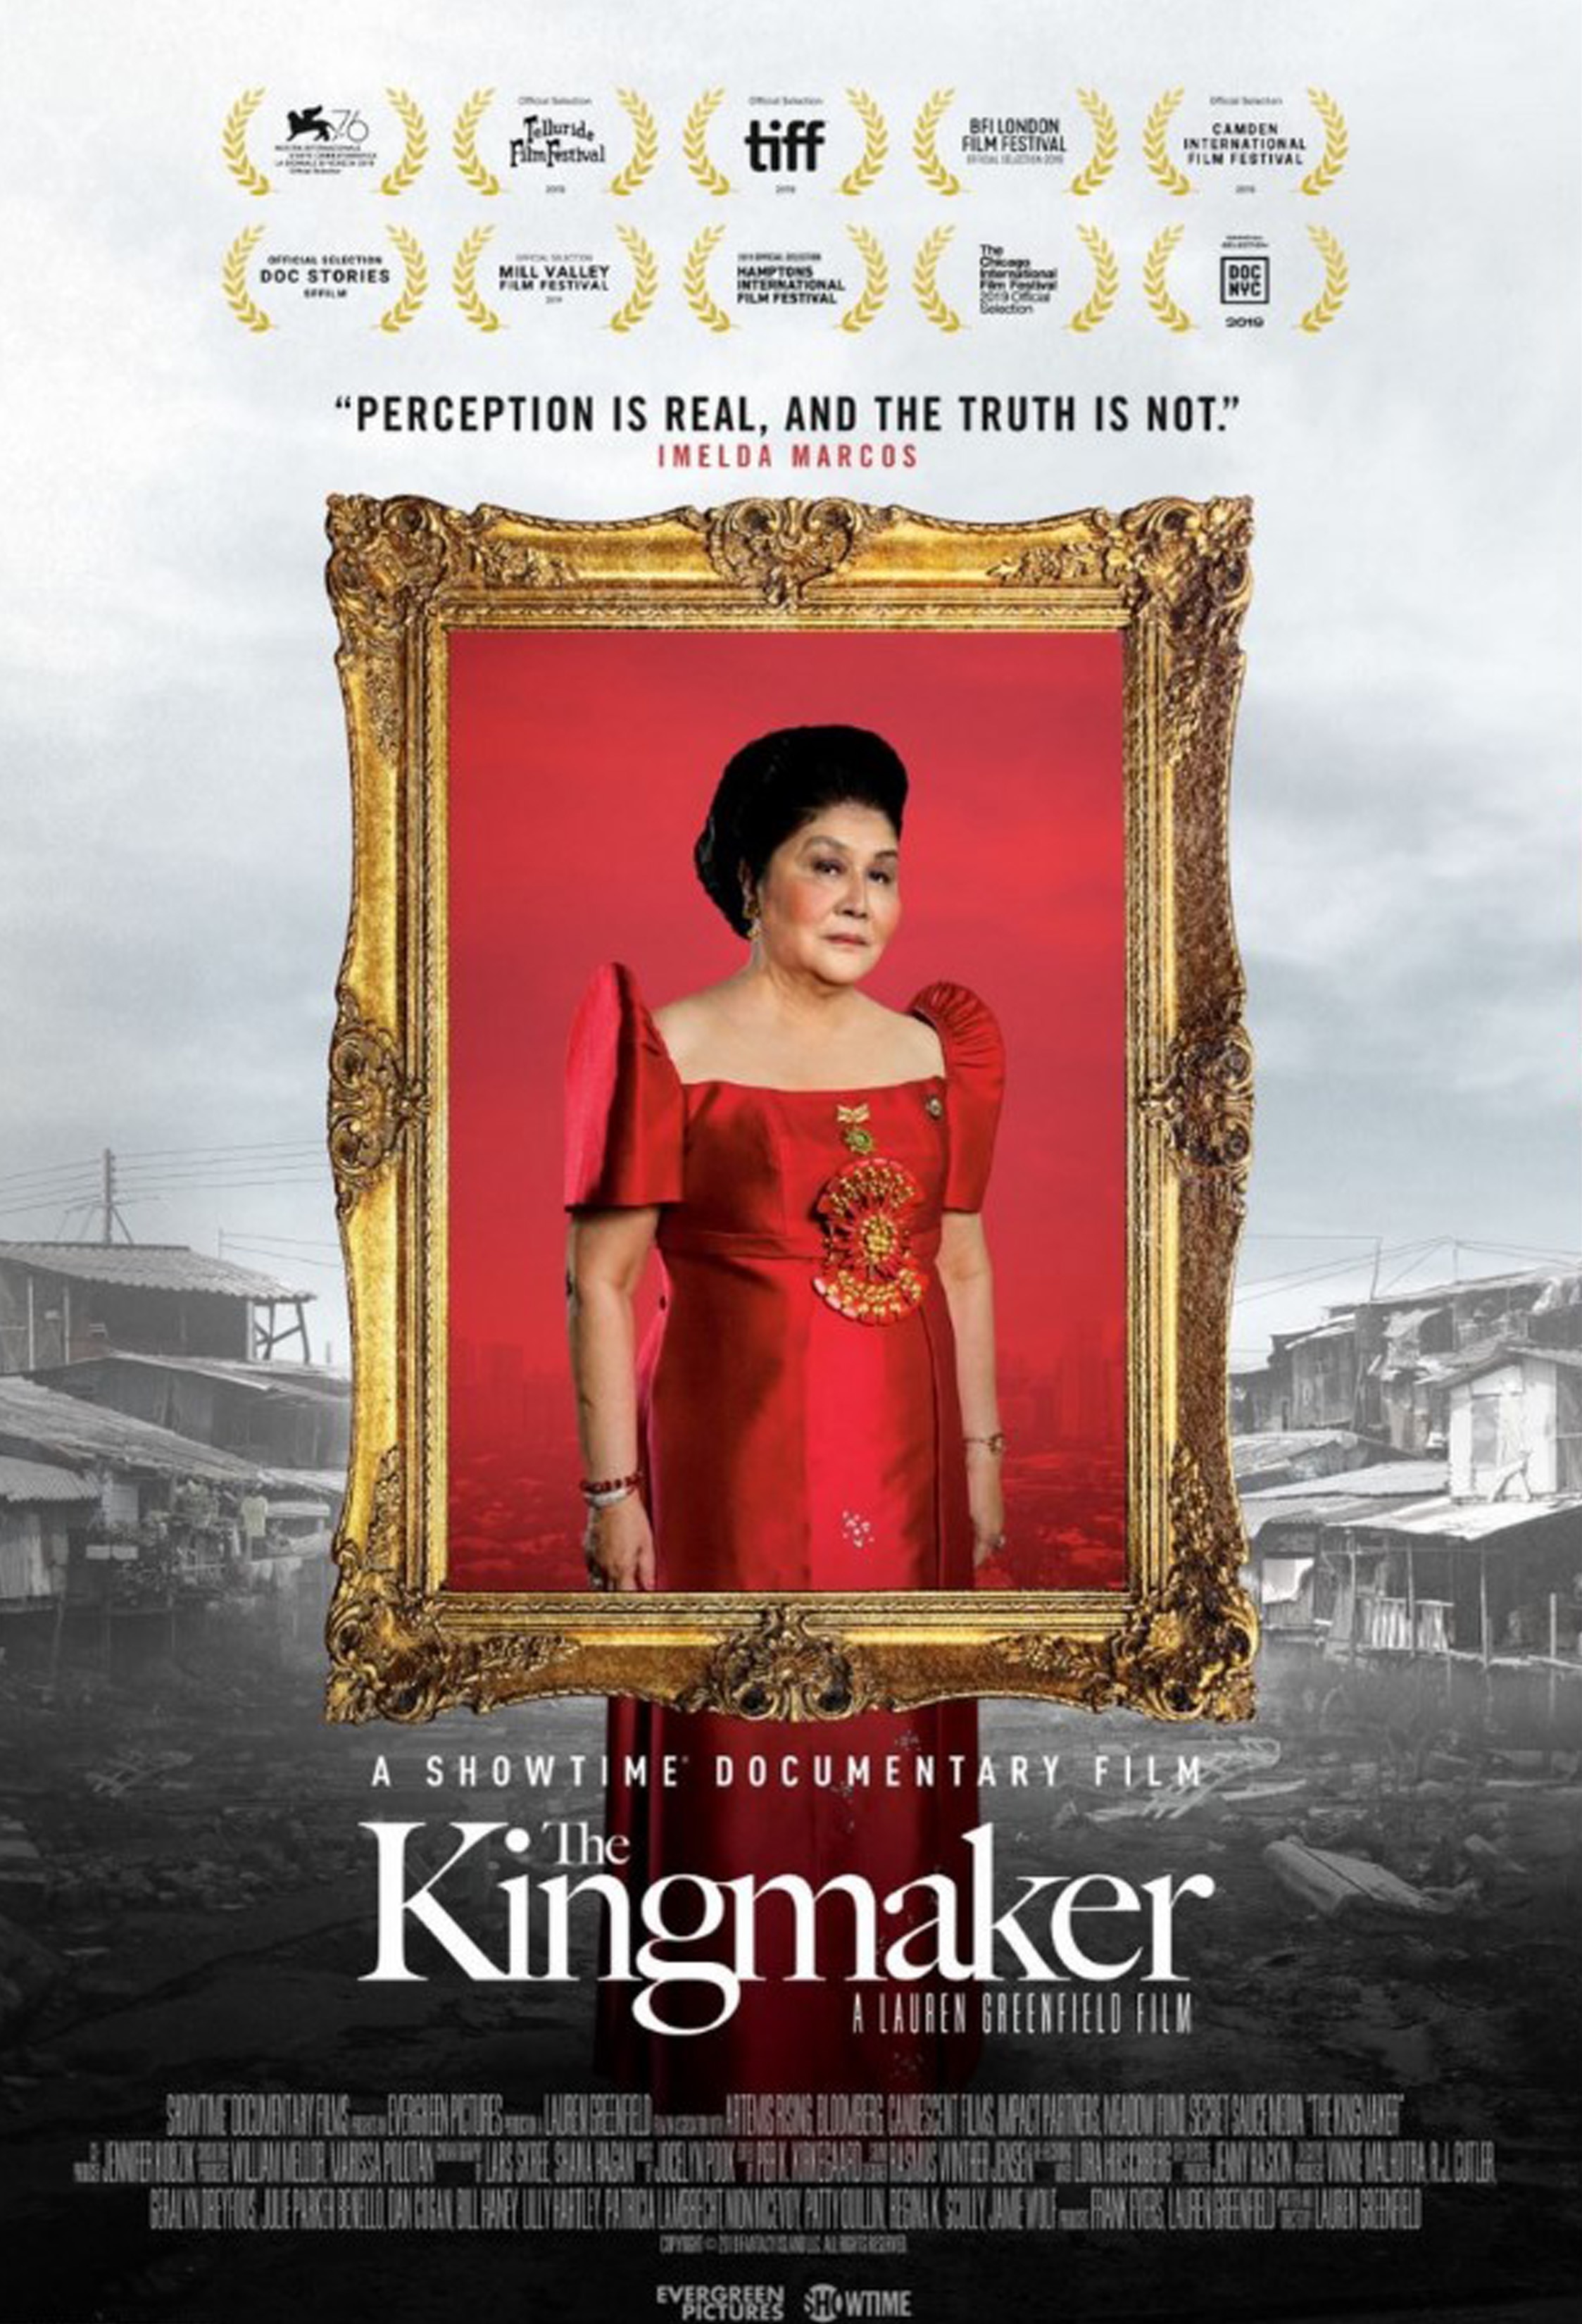 Imelda Marcos documentary ‘The Kingmaker’ to make PH premiere at CCP 1